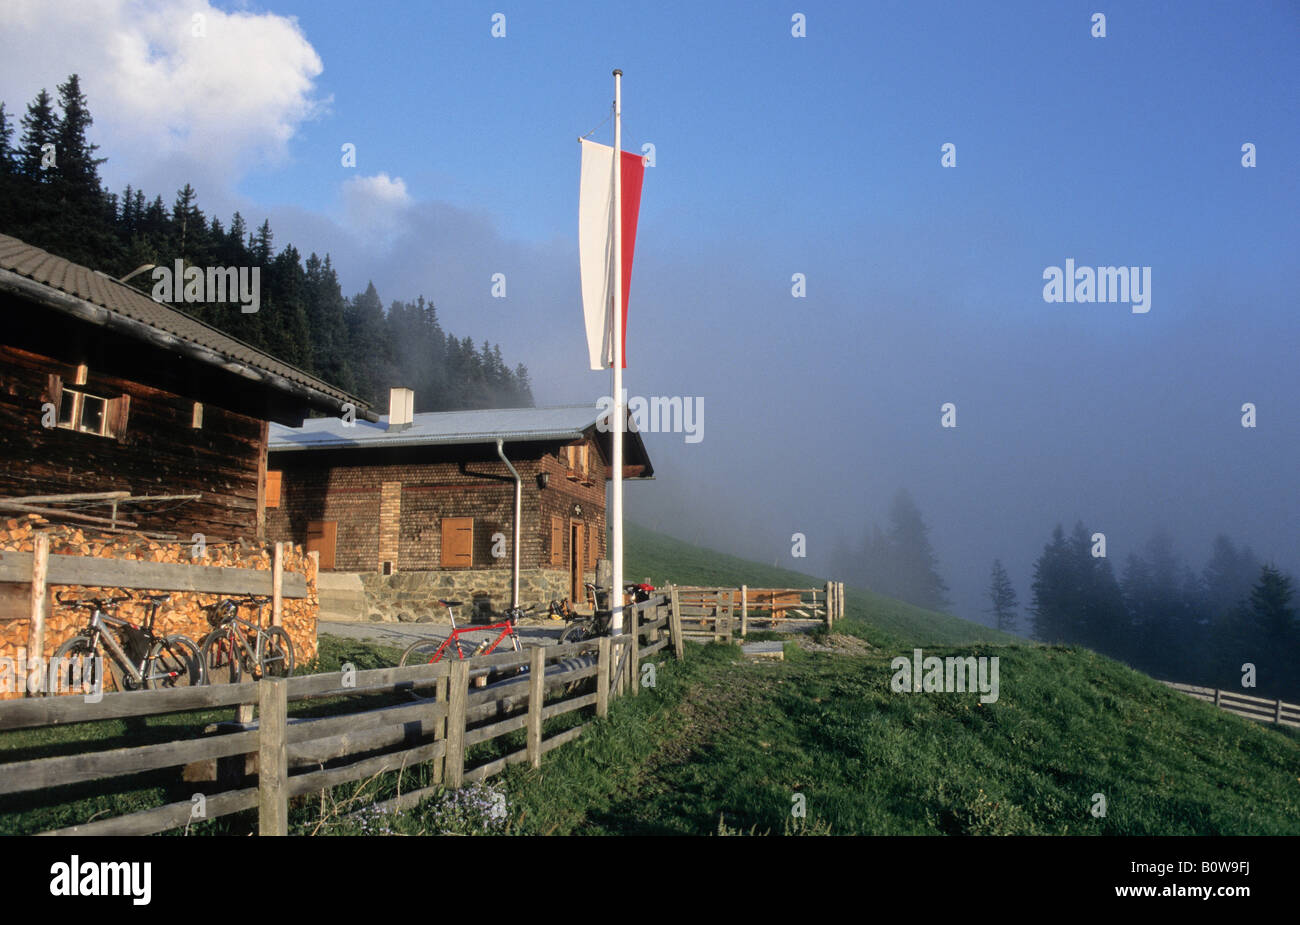 Wafts of mist moving from the forest above an alpine pasture to the Sistranser Alm, Tyrolean flag on a pole, two wooden mountai Stock Photo